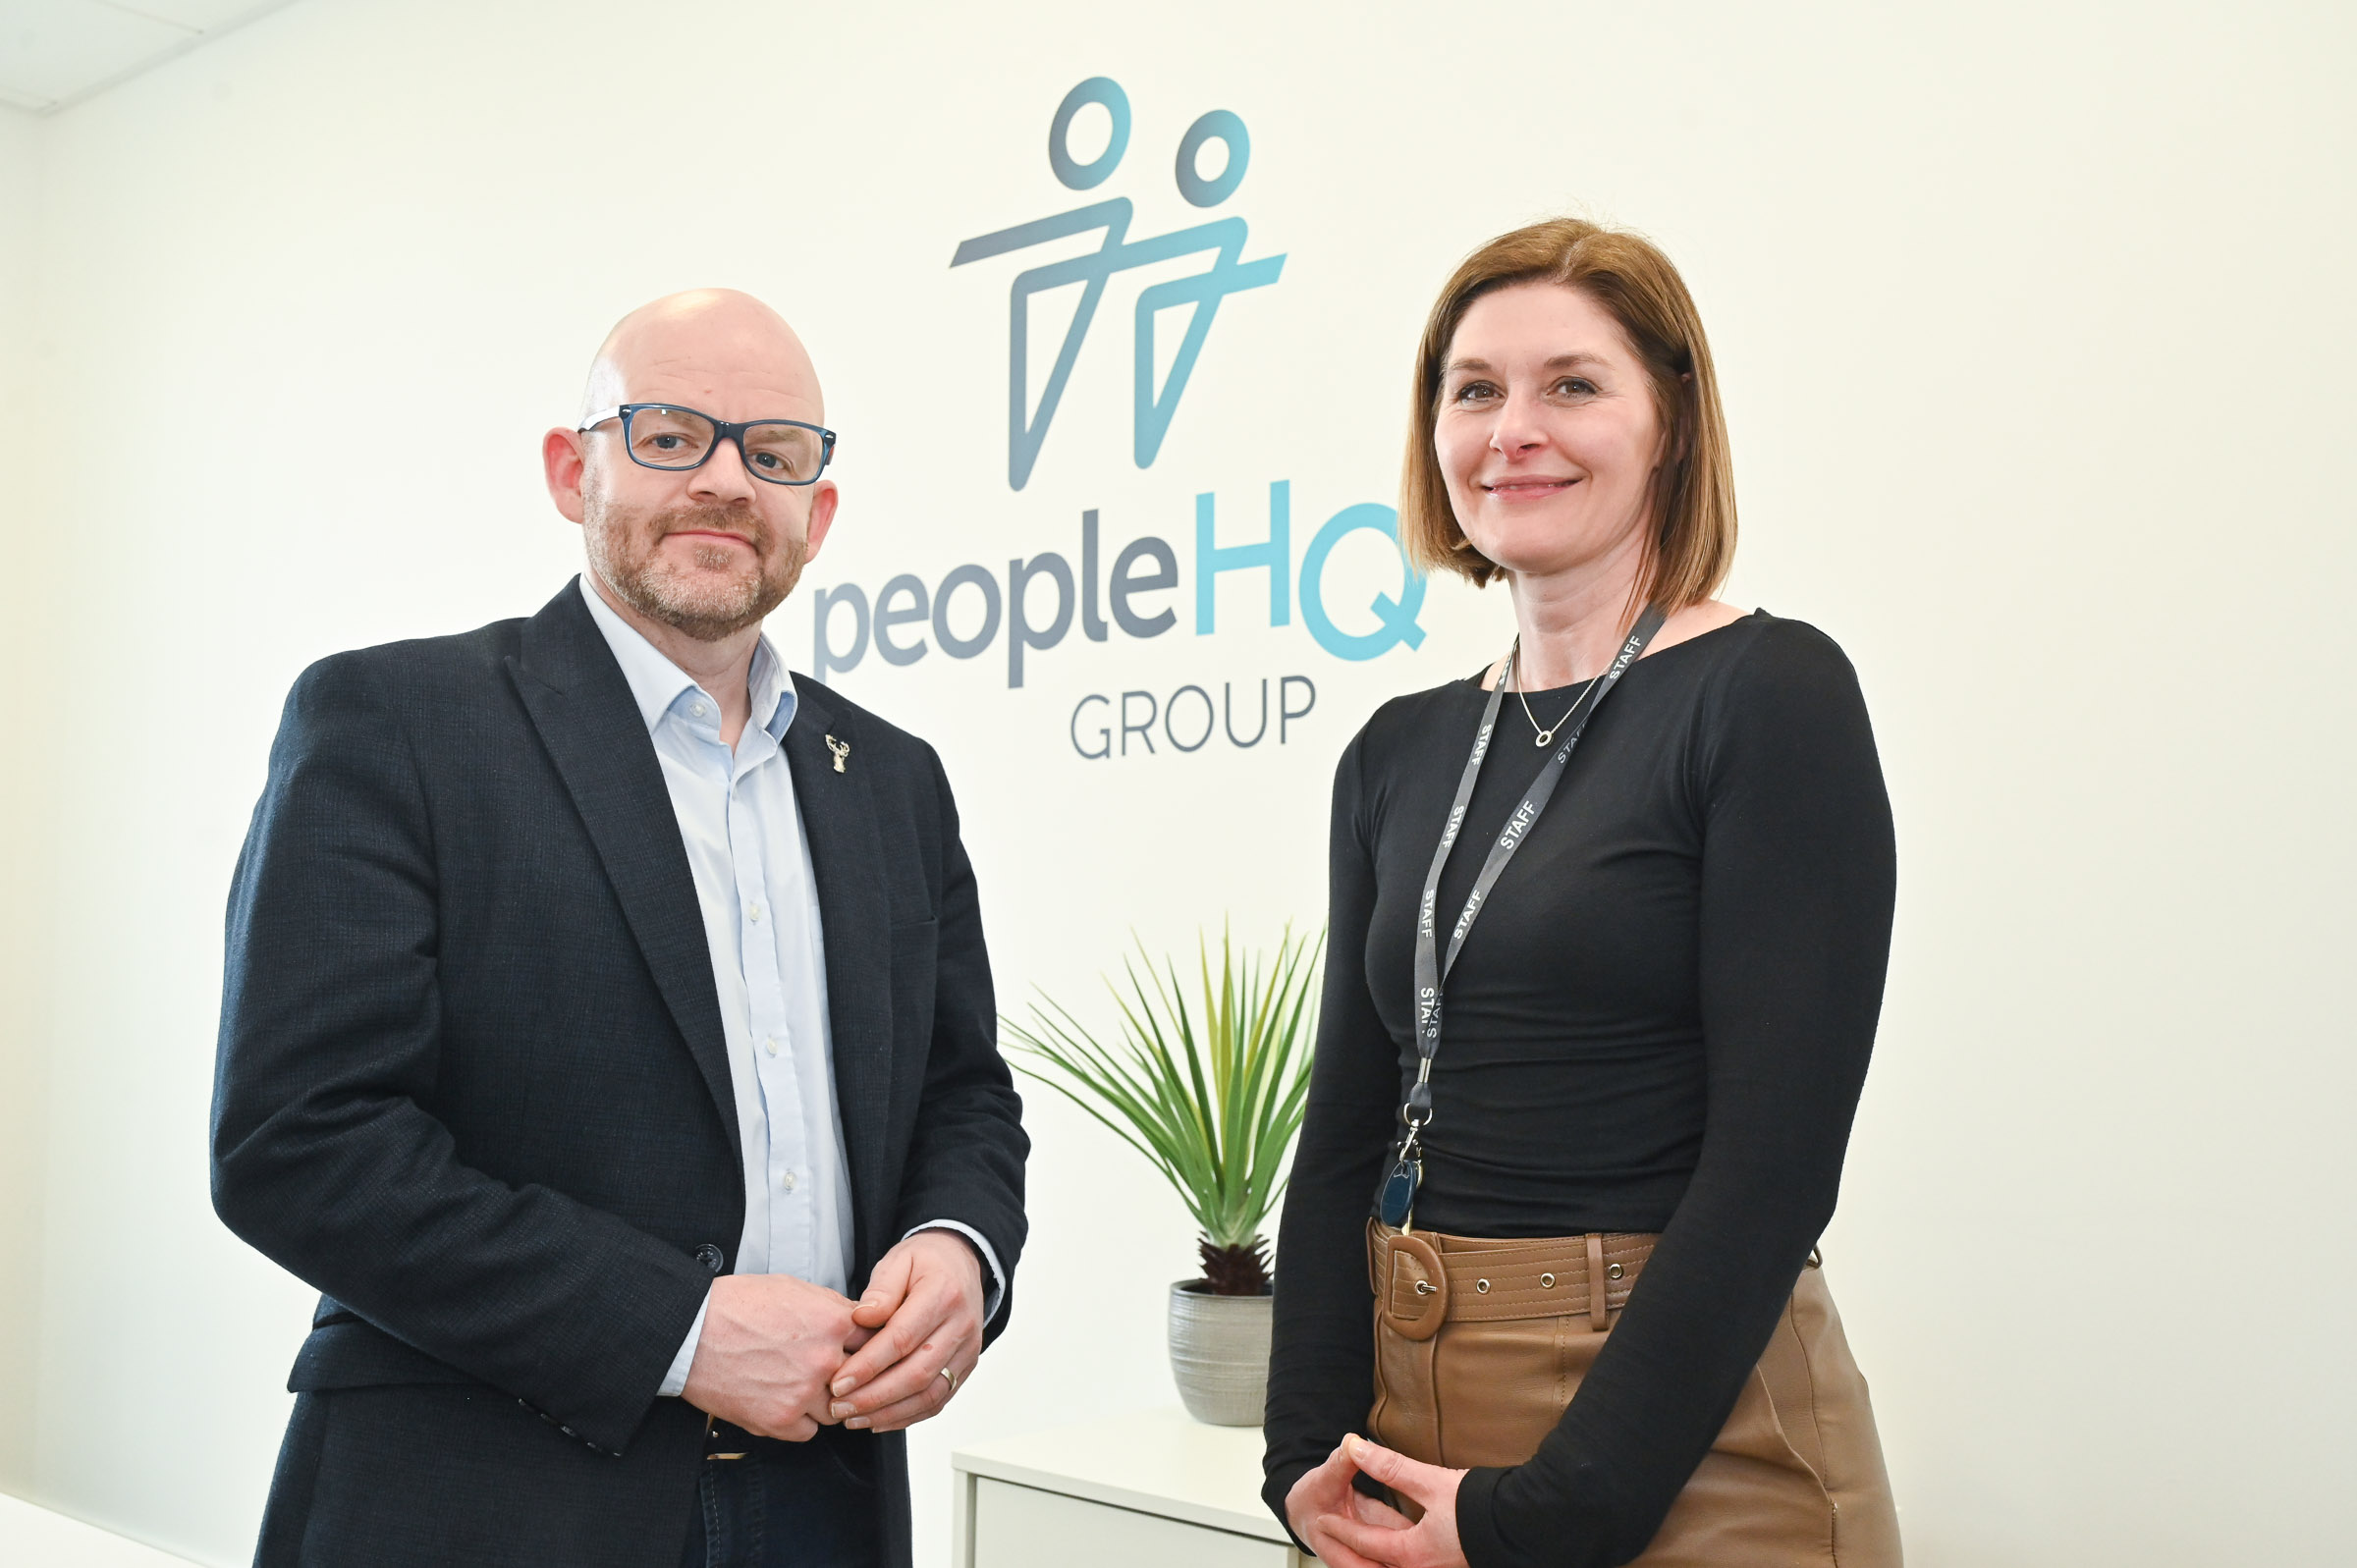 Our Tenant Case Study: People HQ